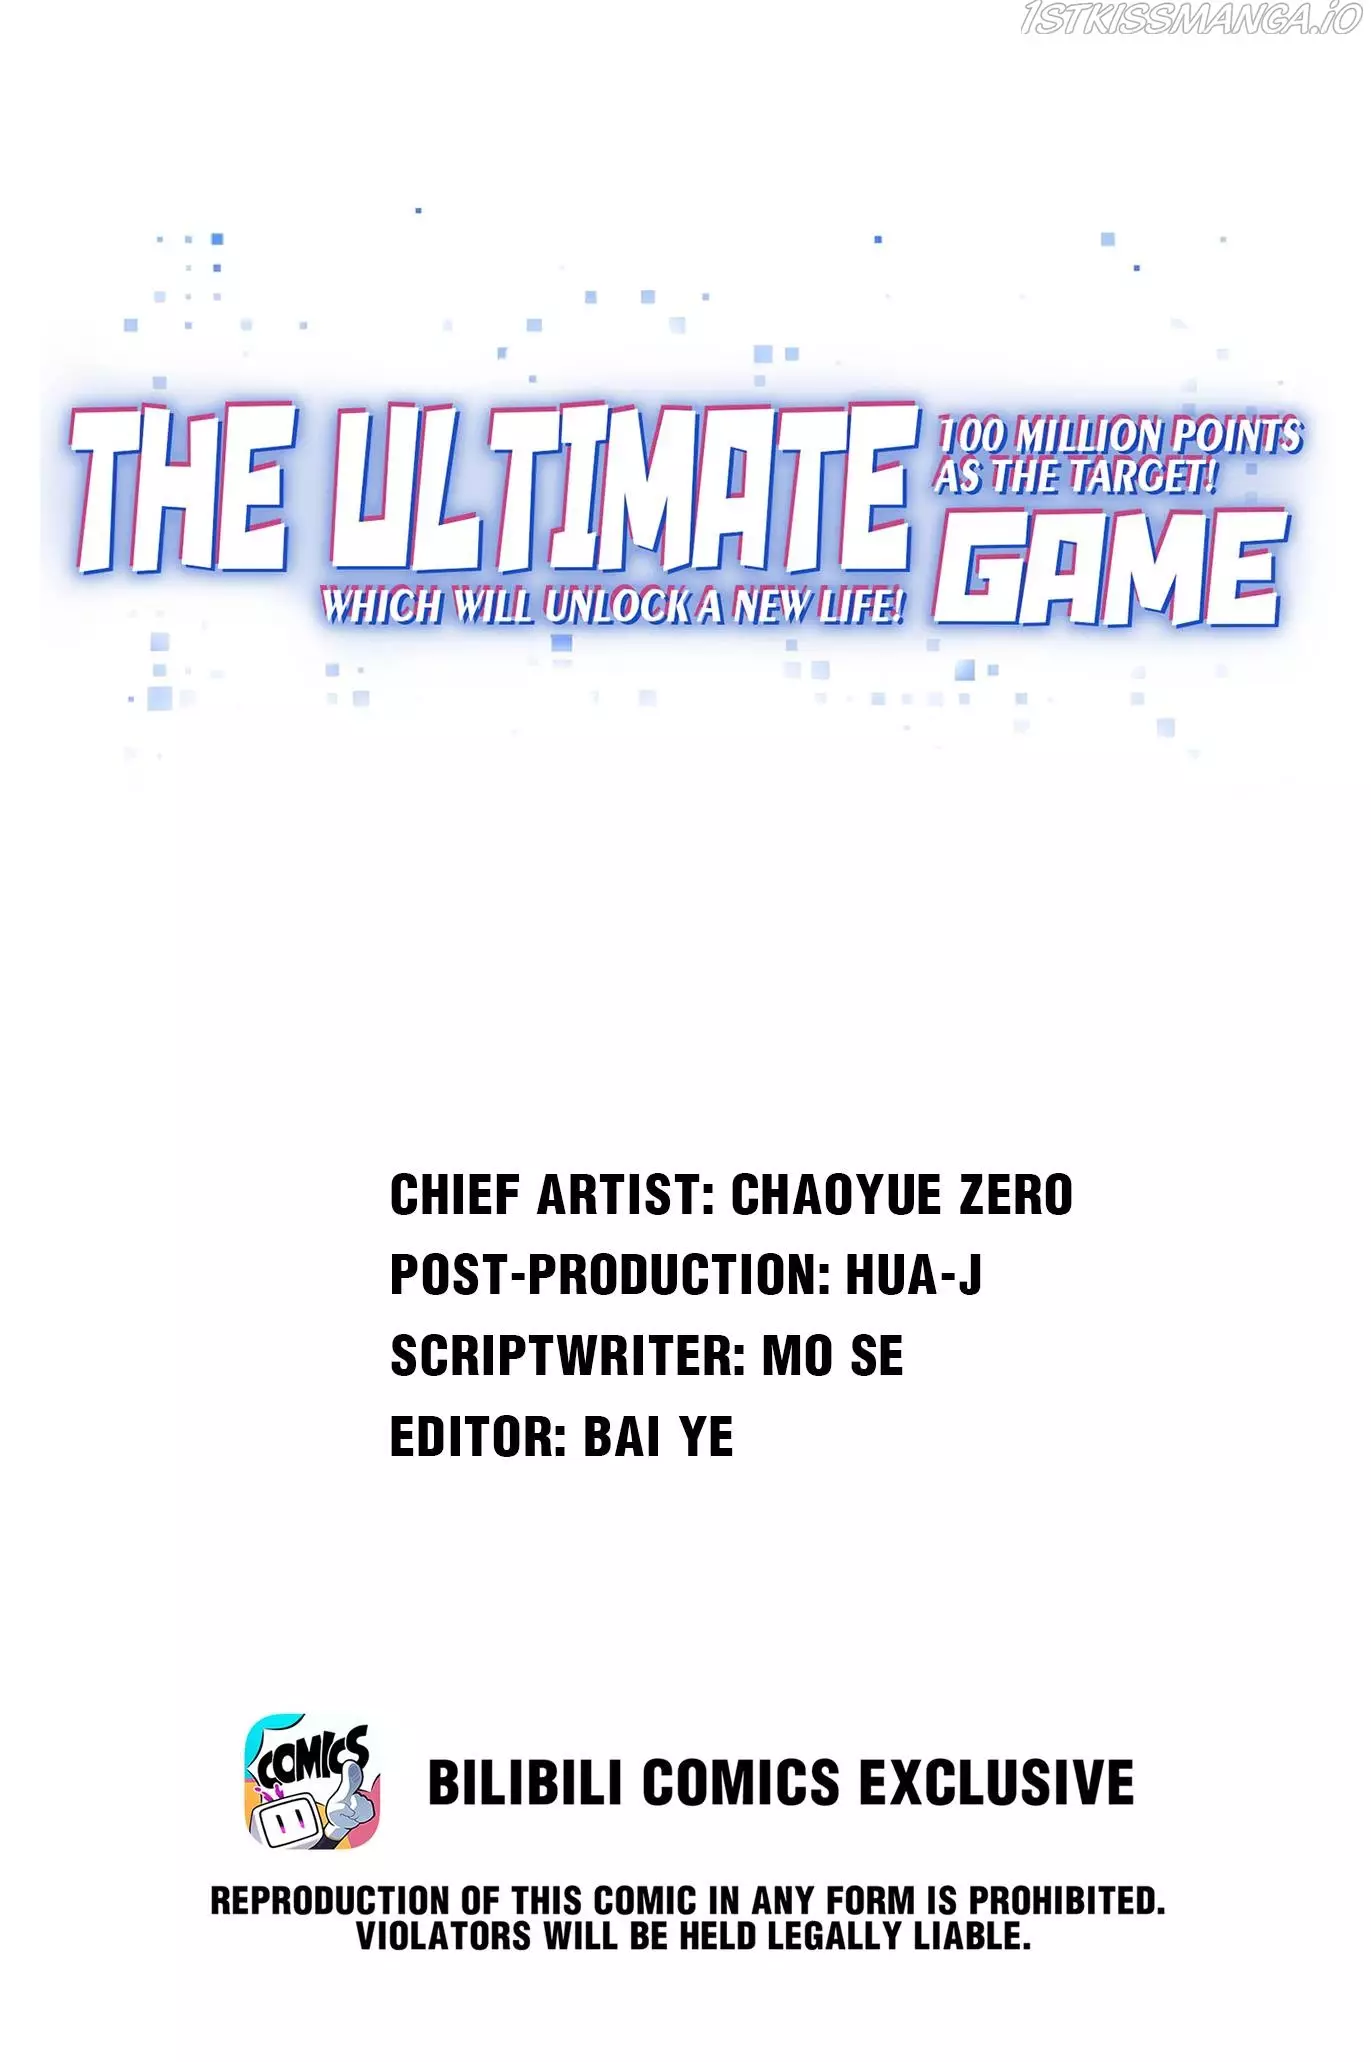 Target 1 Billion Points! Open The Ultimate Game Of Second Life! - 73 page 1-f62dbb7a